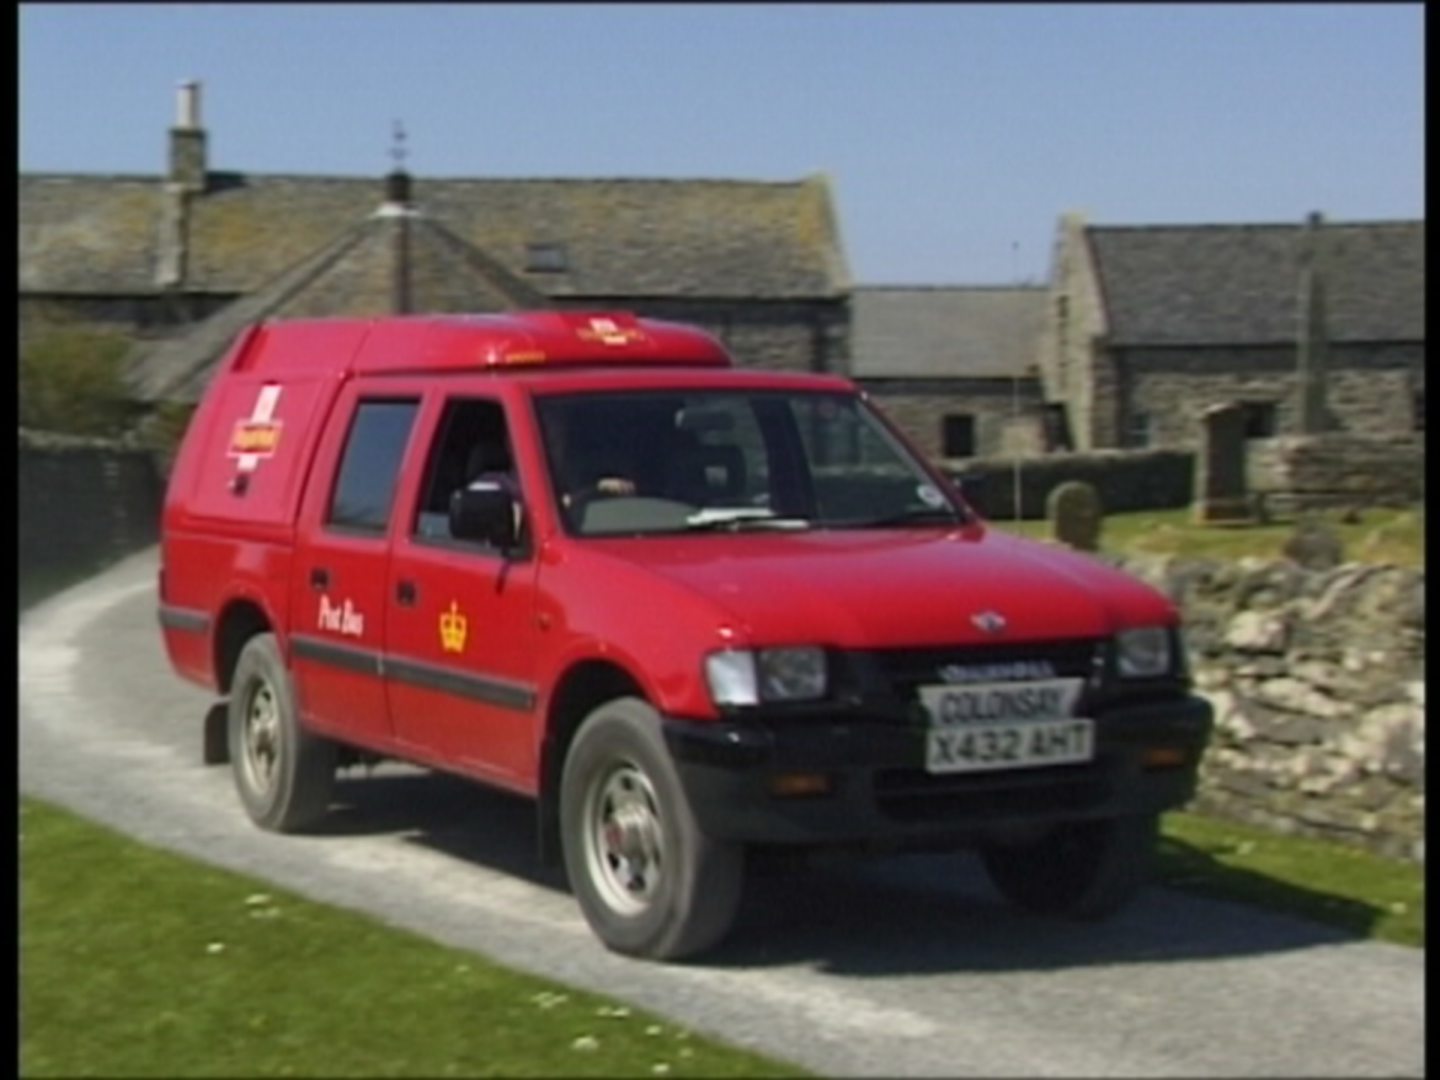 The Colonsay Post bus in front of some cottages